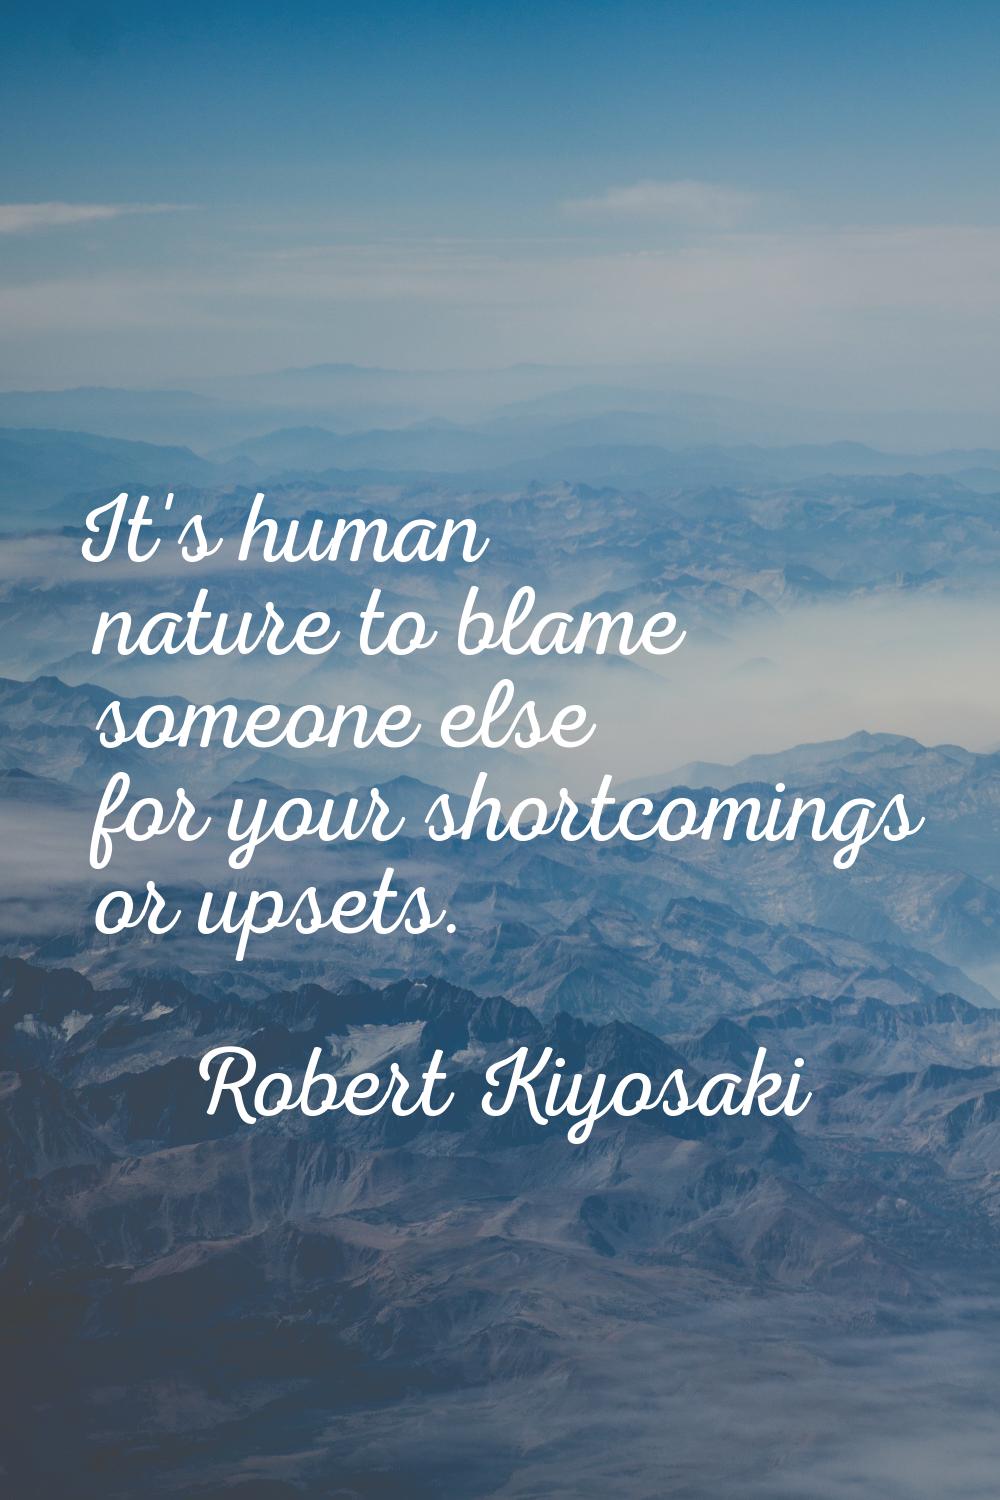 It's human nature to blame someone else for your shortcomings or upsets.